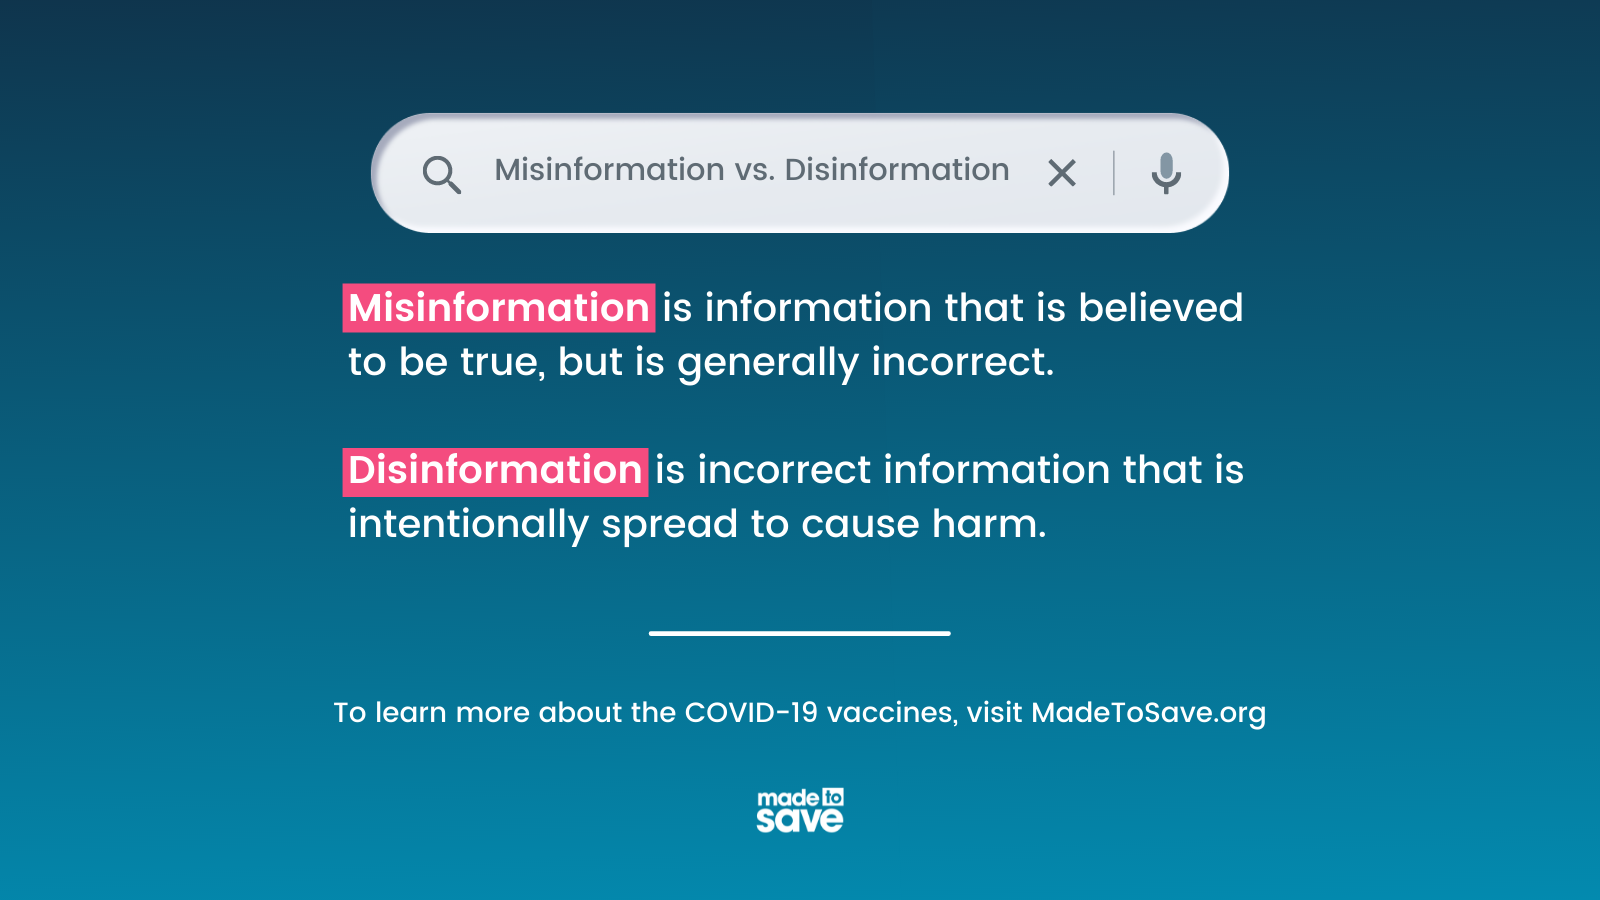 Graphic with dark blue text. At the top of the graphic is a search bar that is asking "Misinformation vs. Disinformation." In white text, the graphic says, "misinformation is information that is believed to be true, but is generally incorrect. Disinformation is incorrect information that is intentionally spread to cause harm. To learn more about the COVID-19 vaccines, visit MadeToSave.org" The Made to Save logo is centered at the bottom of the graphic.